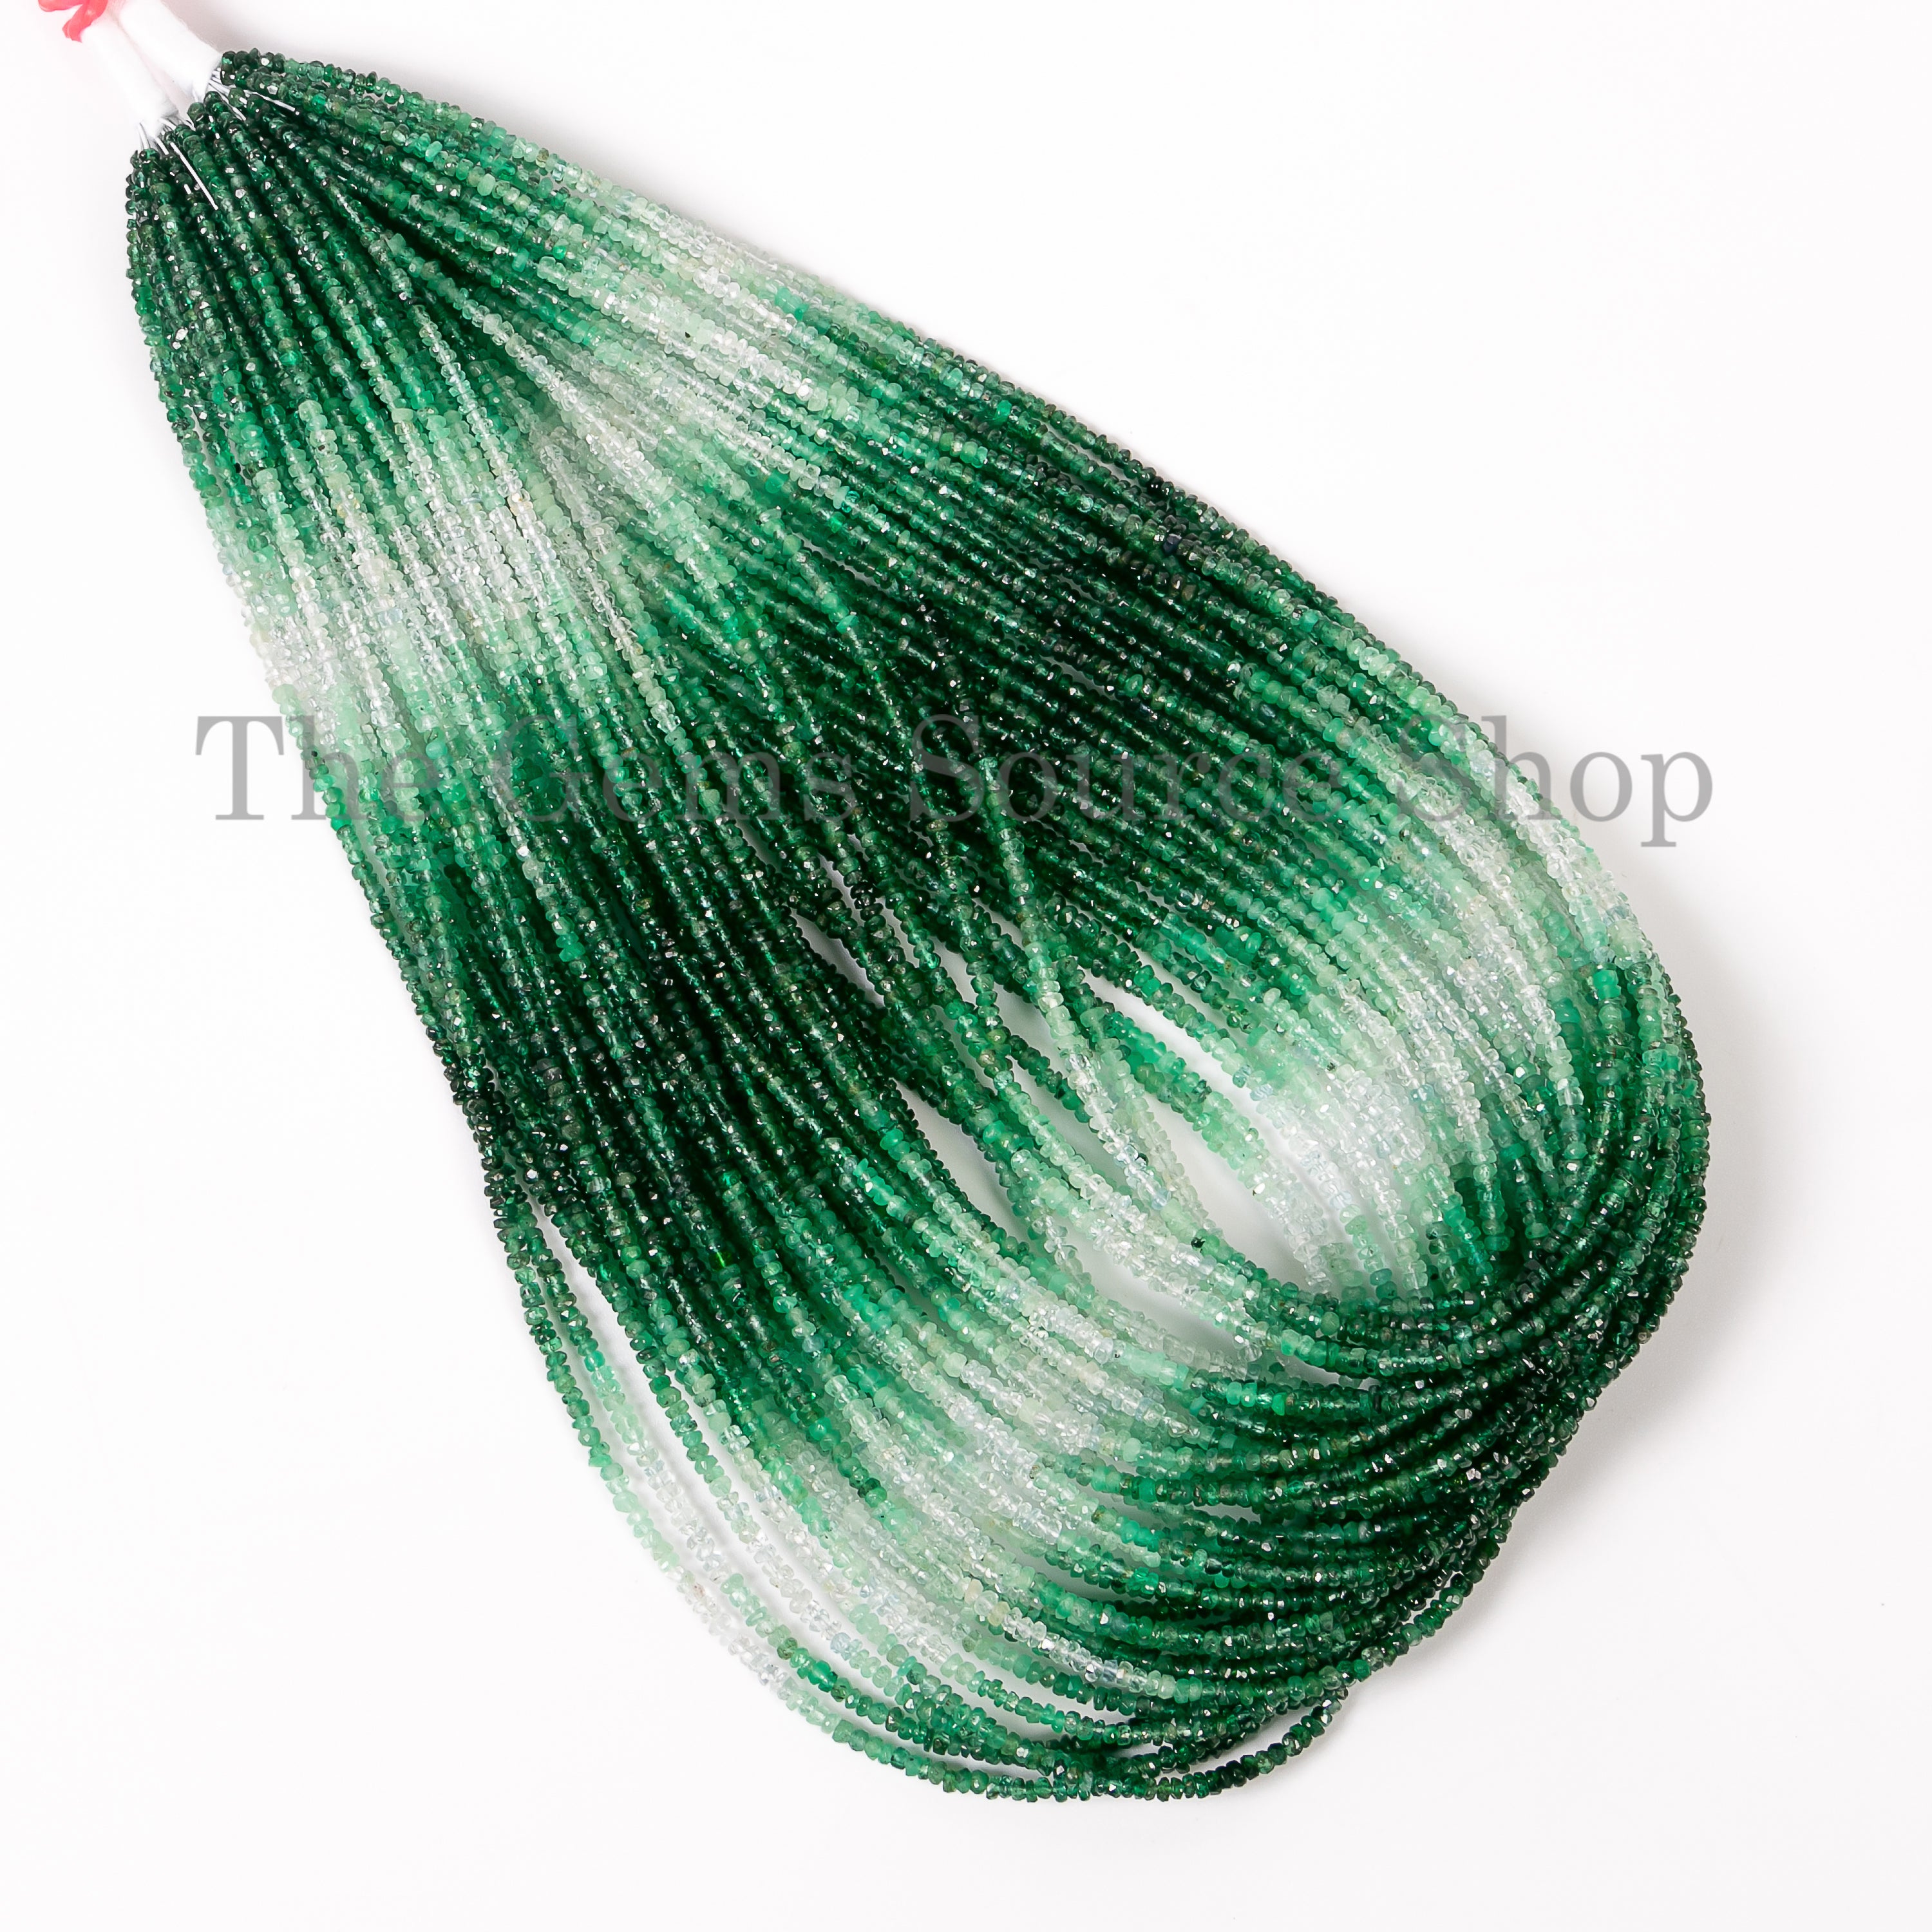 2-2.75 mm Shaded Emerald Briolette Beads, Shaded Emerald Faceted Rondelle Beads, Emerald Faceted Beads, Rondelle Shape Beads, Loose Emerald